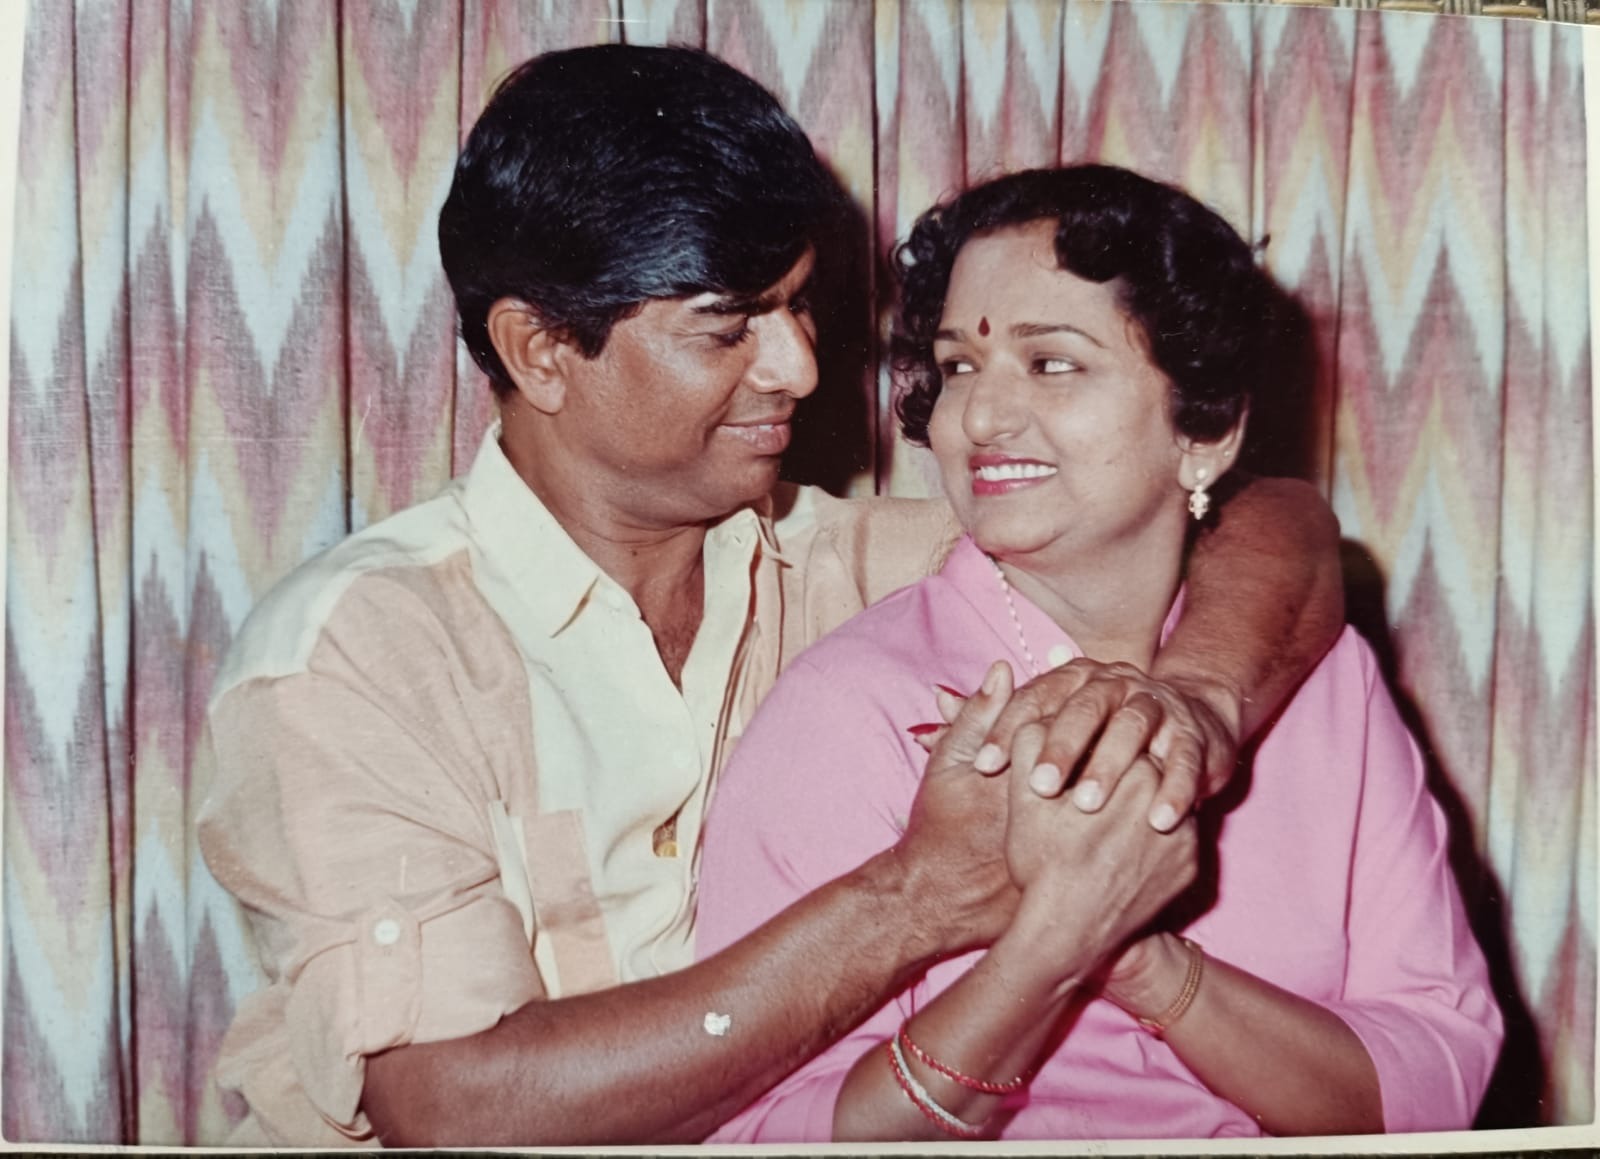 S A Chandrasekhar Post Throwback Photo for Valentines day